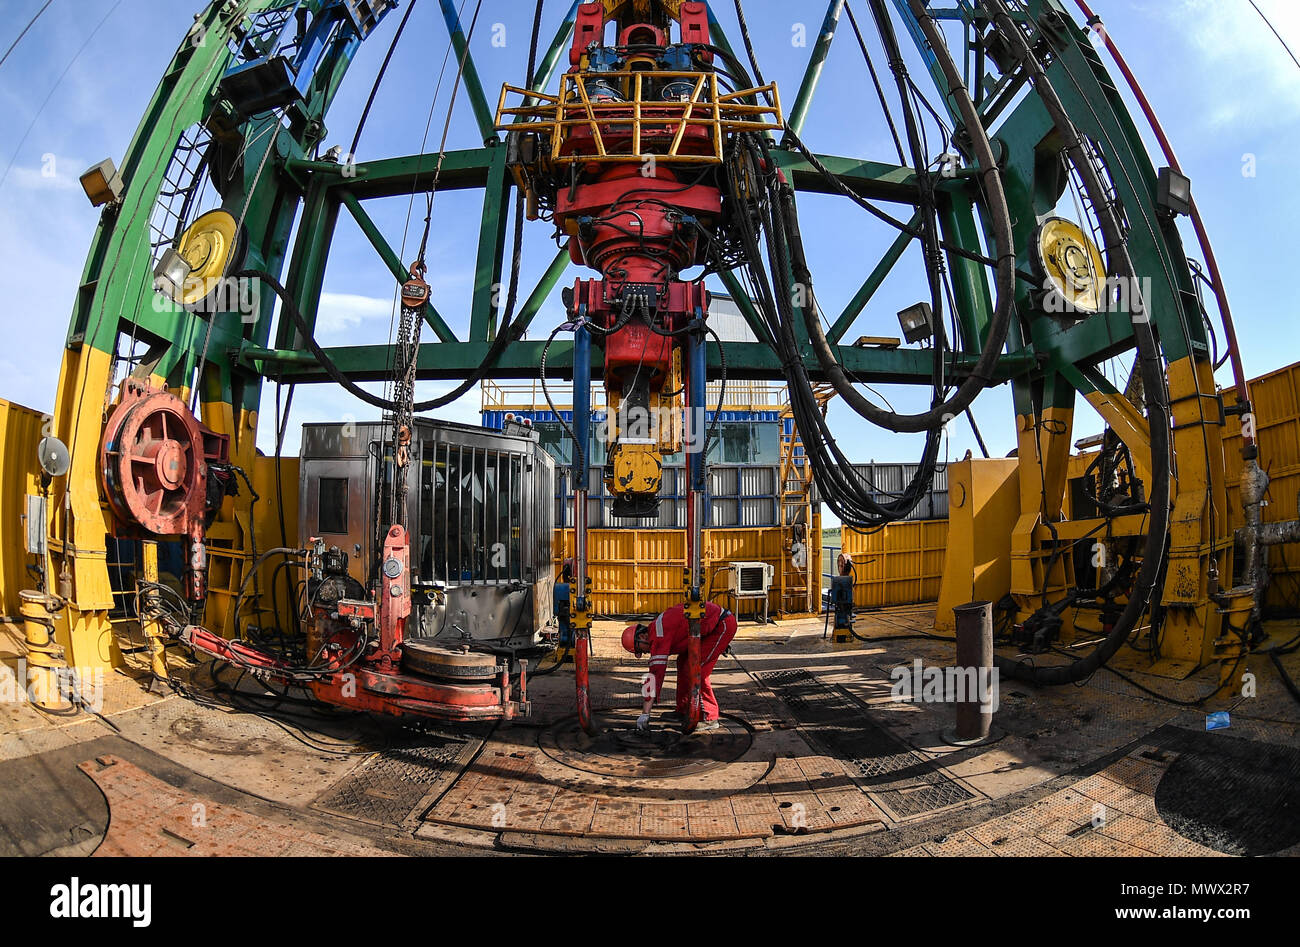 Changchun, China. 1st June, 2018. A worker conducts machinery check on the Crust 1 land-based drilling rig system in the Songliao Basin in northeast China, June 1, 2018. Crust 1, a land-based drilling rig, concluded its first mission on Saturday, putting China among the frontrunners in onshore drilling, along with Germany and Russia. Jointly developed by Jilin University and Sichuan-based Honghua Group, Crust 1 can dig as deep as 10,000 meters and is China's most advanced land-based drilling rig. Credit: Xu Chang/Xinhua/Alamy Live News Stock Photo